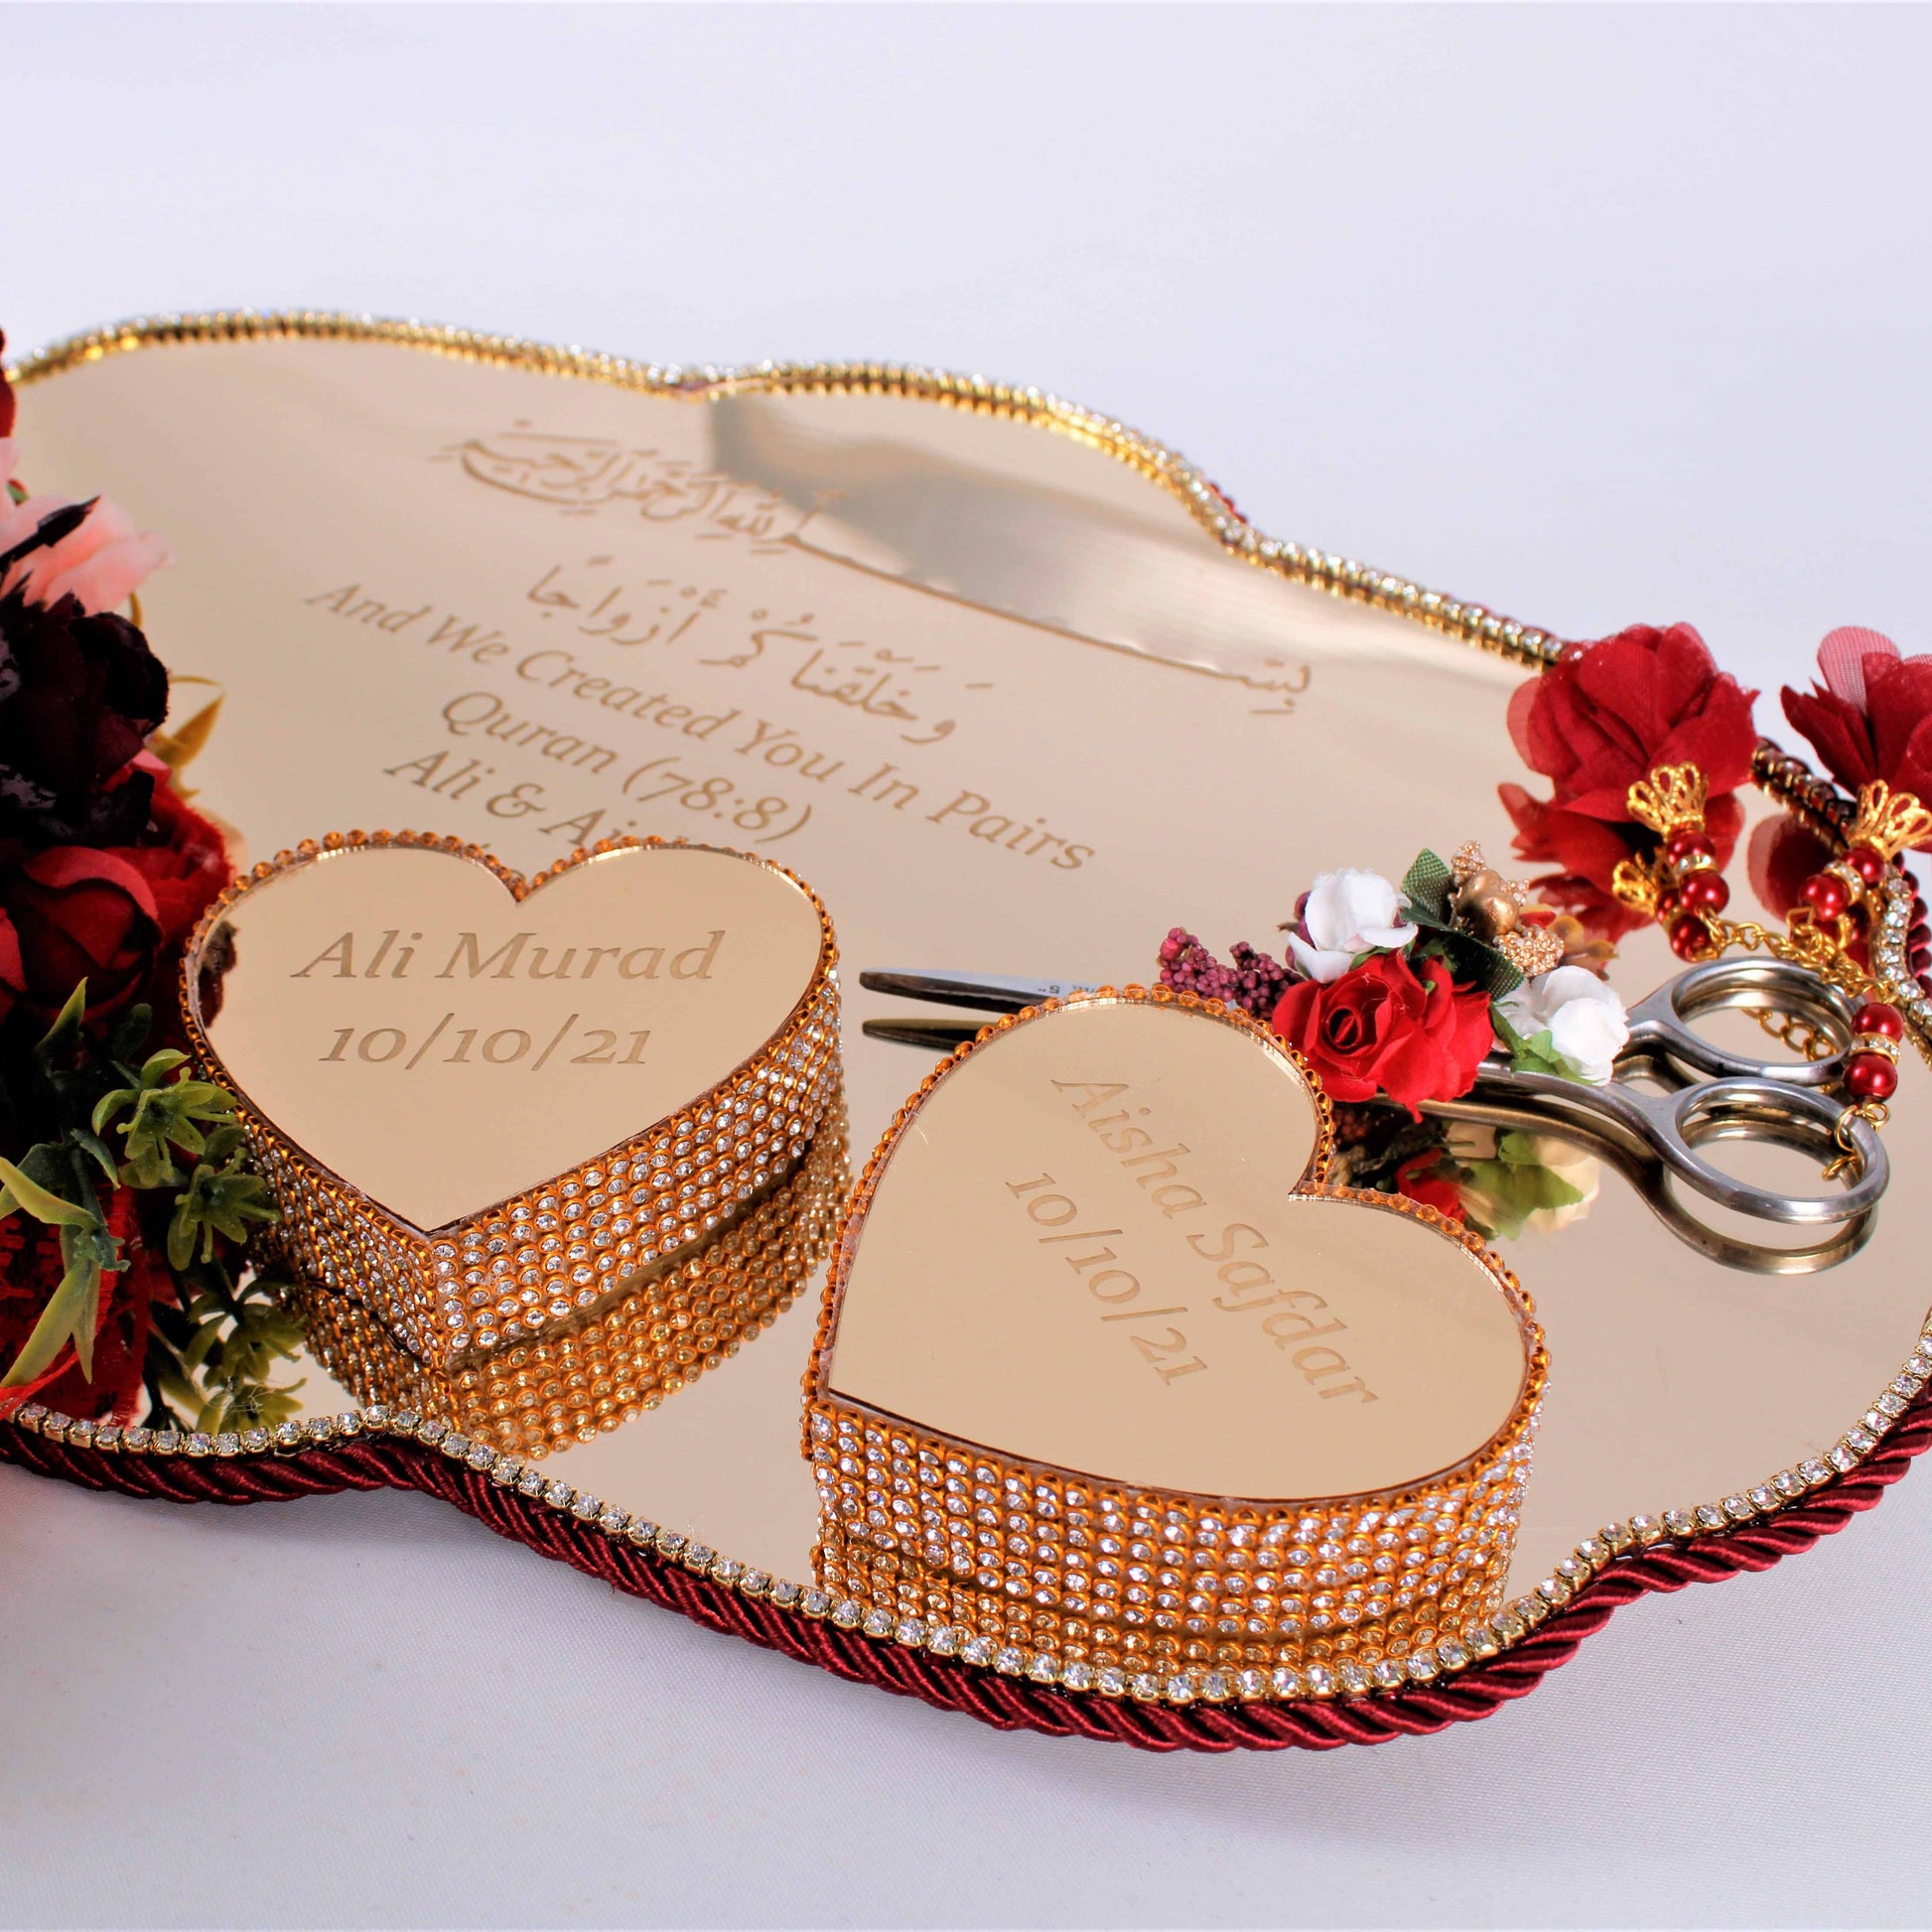 Personalized Wedding Ring Plate Heart Shape Ring Box Scissor Gift Set - Islamic Elite Favors is a handmade gift shop offering a wide variety of unique and personalized gifts for all occasions. Whether you're looking for the perfect Ramadan, Eid, Hajj, wedding gift or something special for a birthday, baby shower or anniversary, we have something for everyone. High quality, made with love.